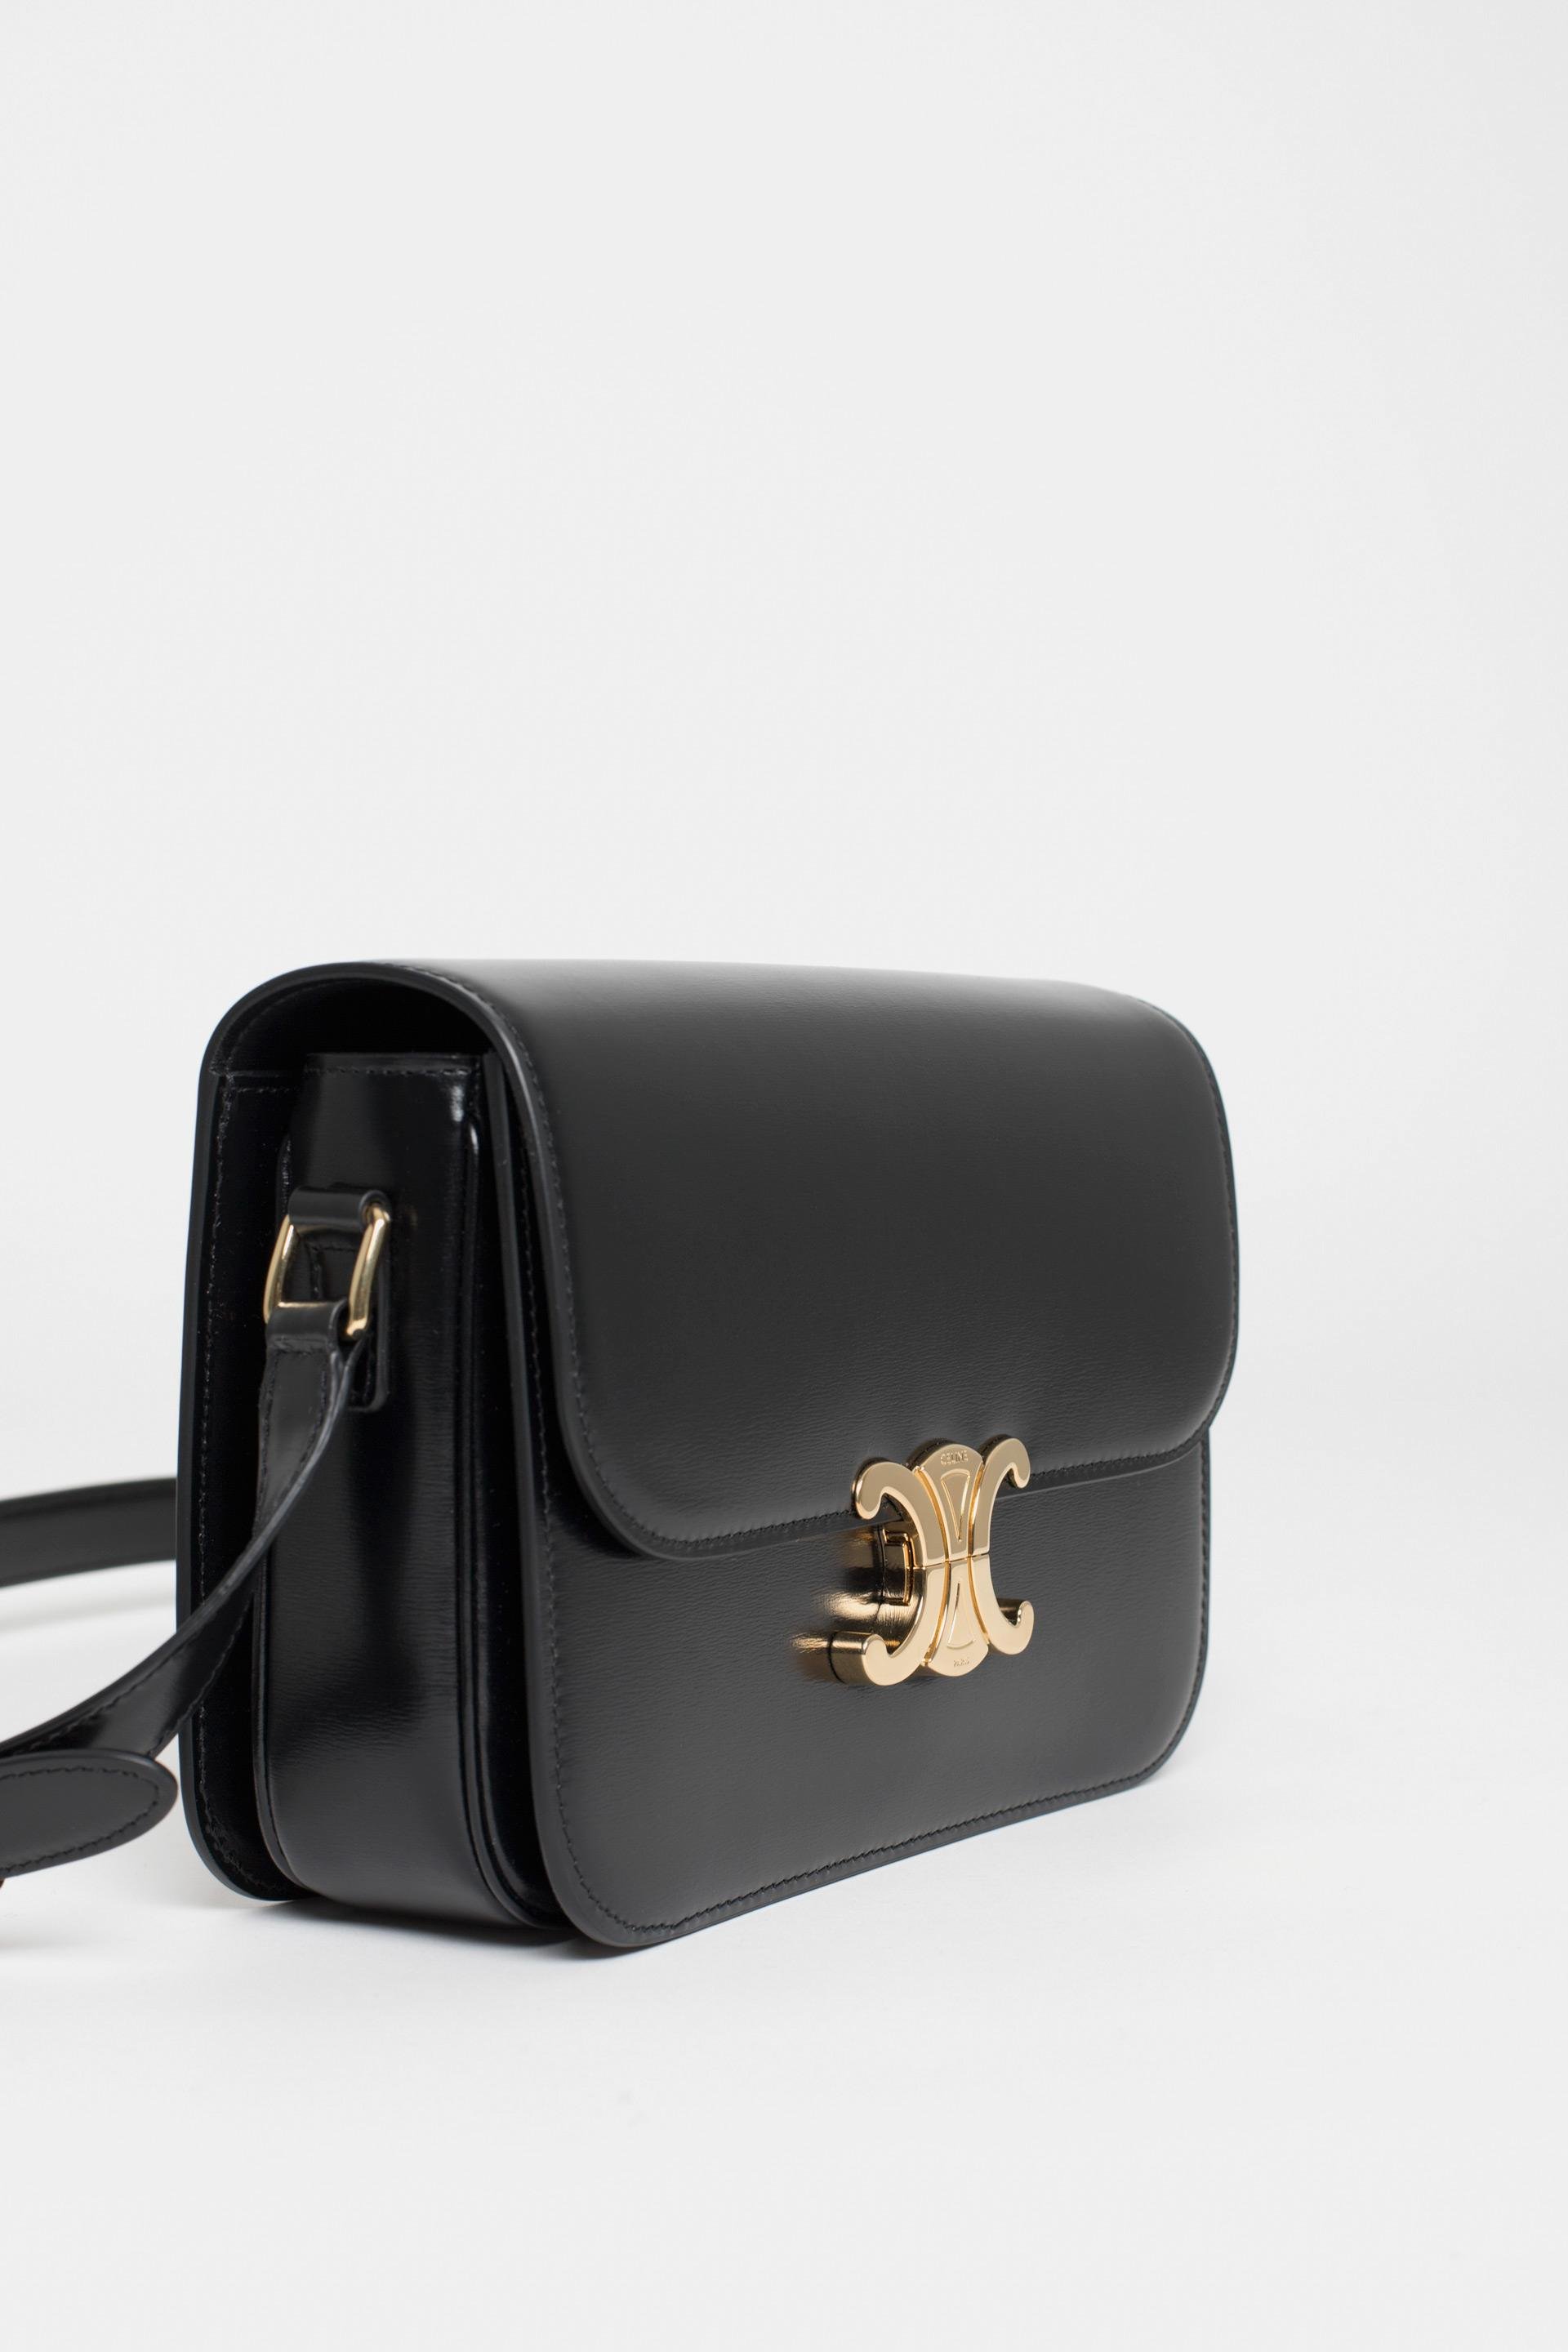 Celine Leather Triomphe Small Bag in Black | Lyst